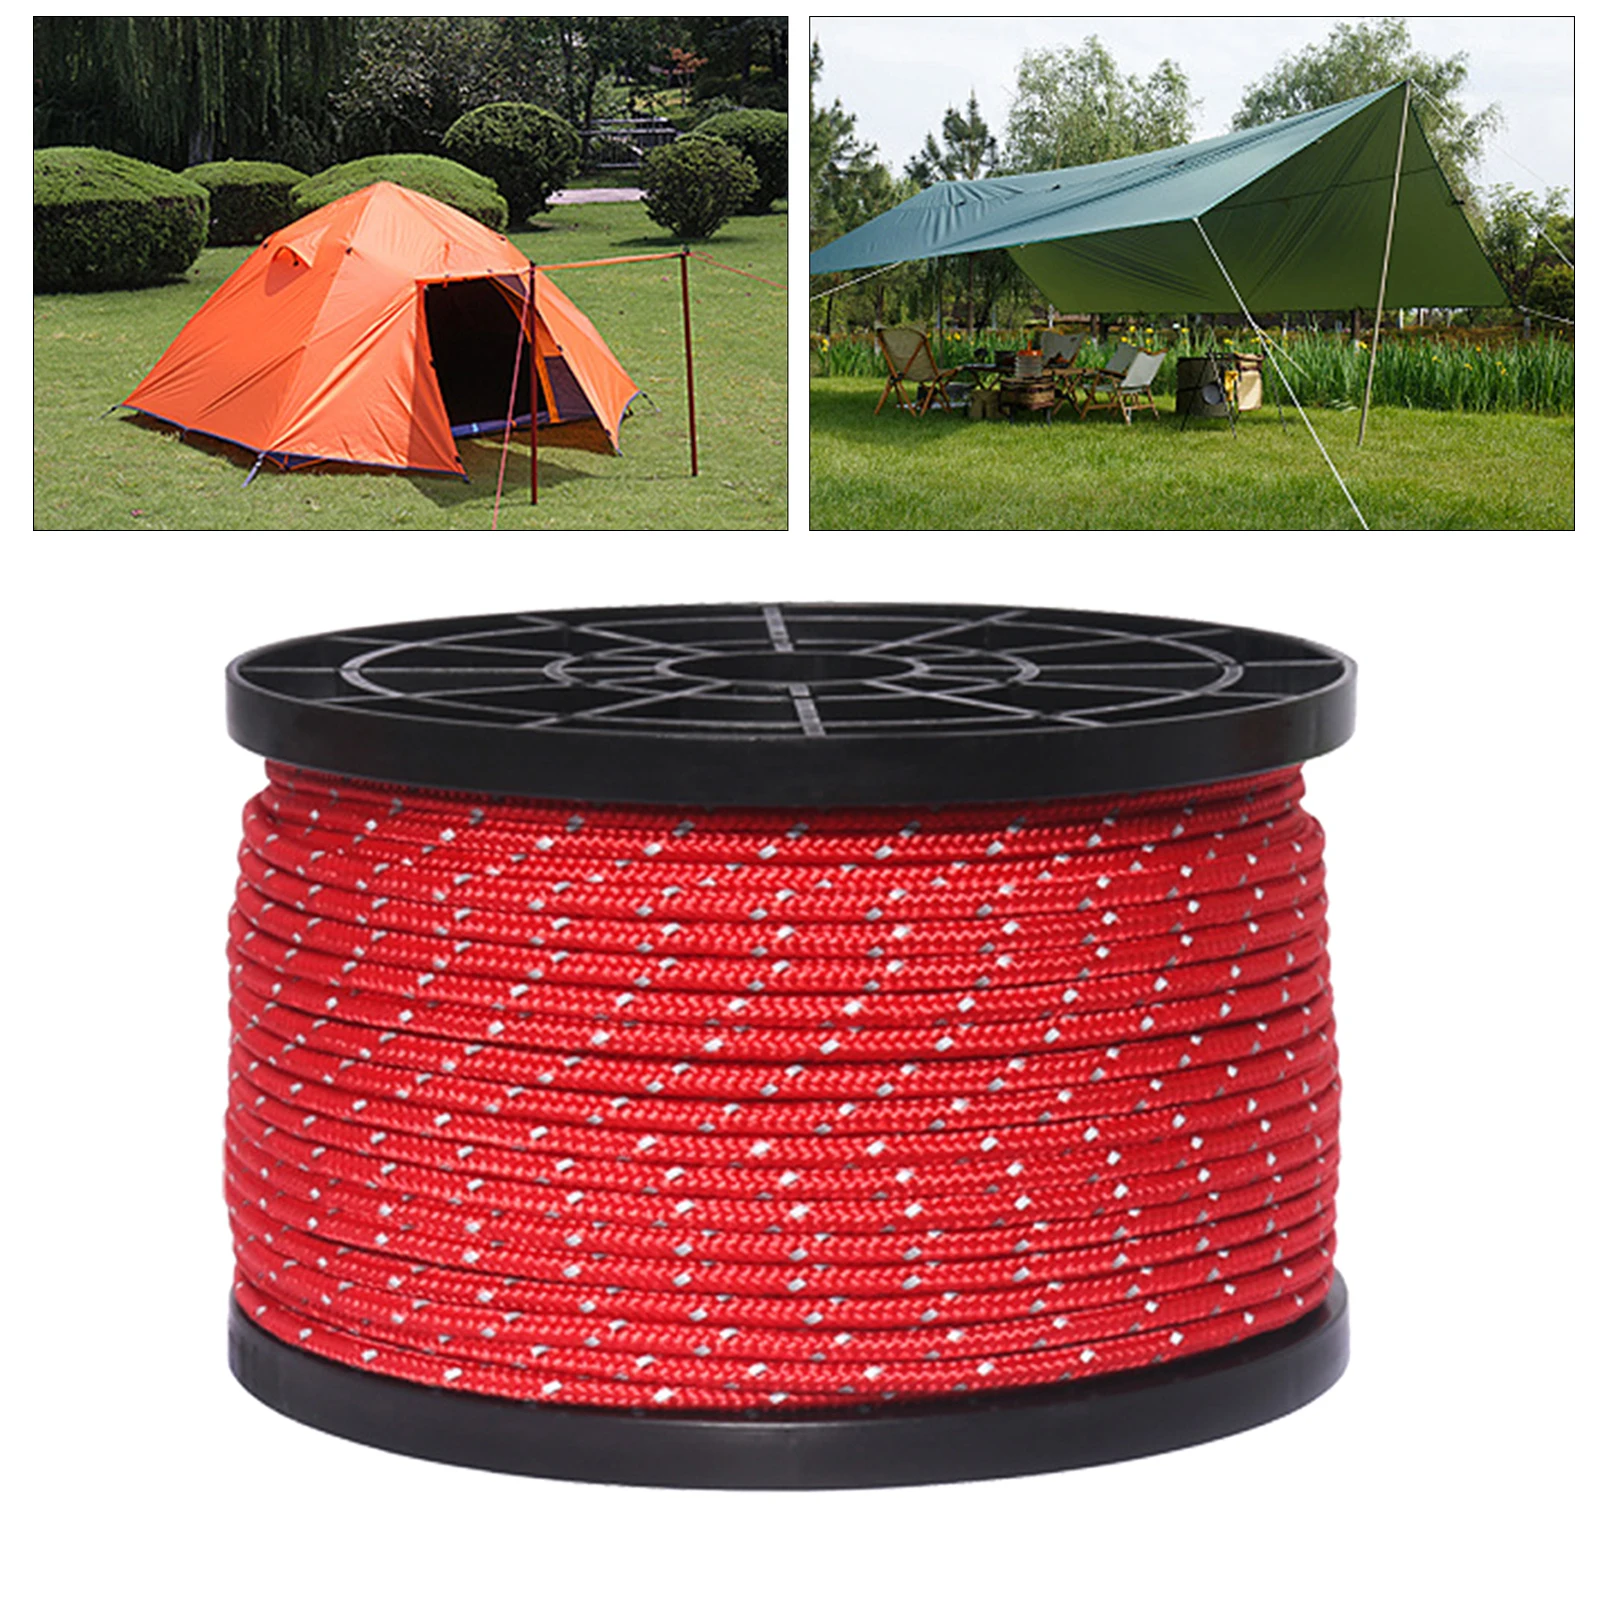 3mm Diameter, 50 Nylon Tent Rope, Outdoor Clothesline, The Dark Camping Rope for Indoor 